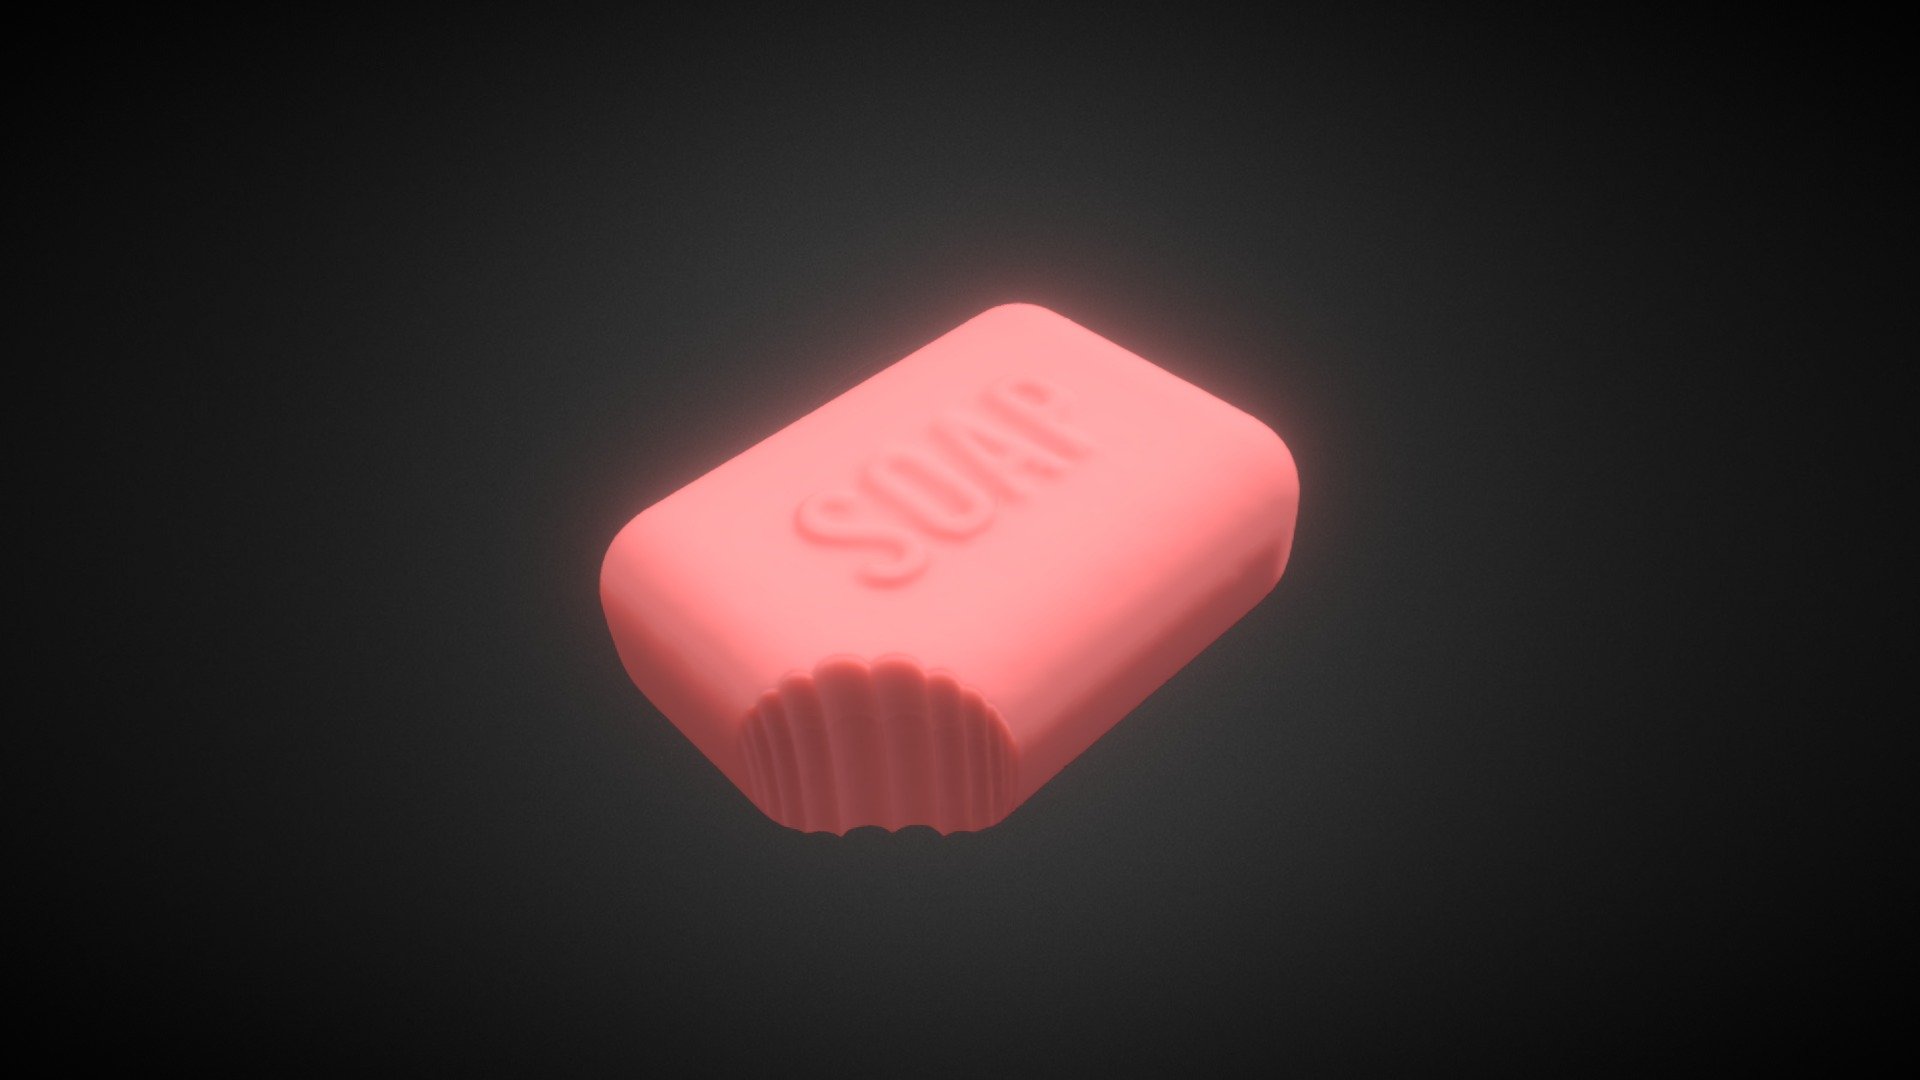 Just an simple soap 3d model